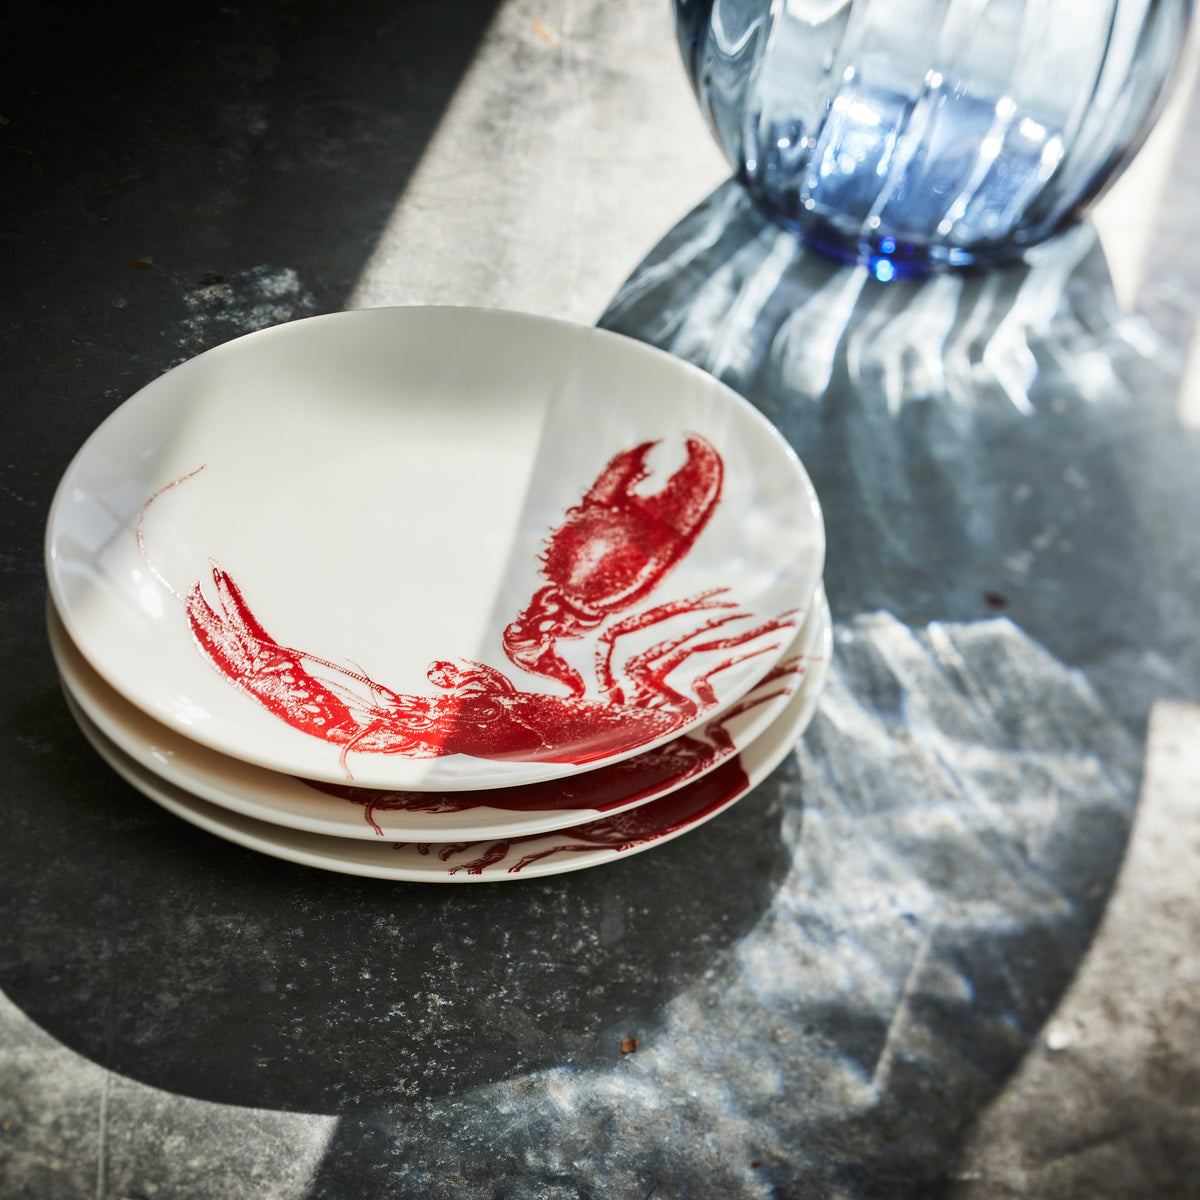 Stack of Caskata Artisanal Home Lobster Red Small Plates featuring red lobster illustrations, placed on a reflective surface with a blue glass vase nearby. Sunlight casts shadows across the scene, adding to the seaside style ambiance.